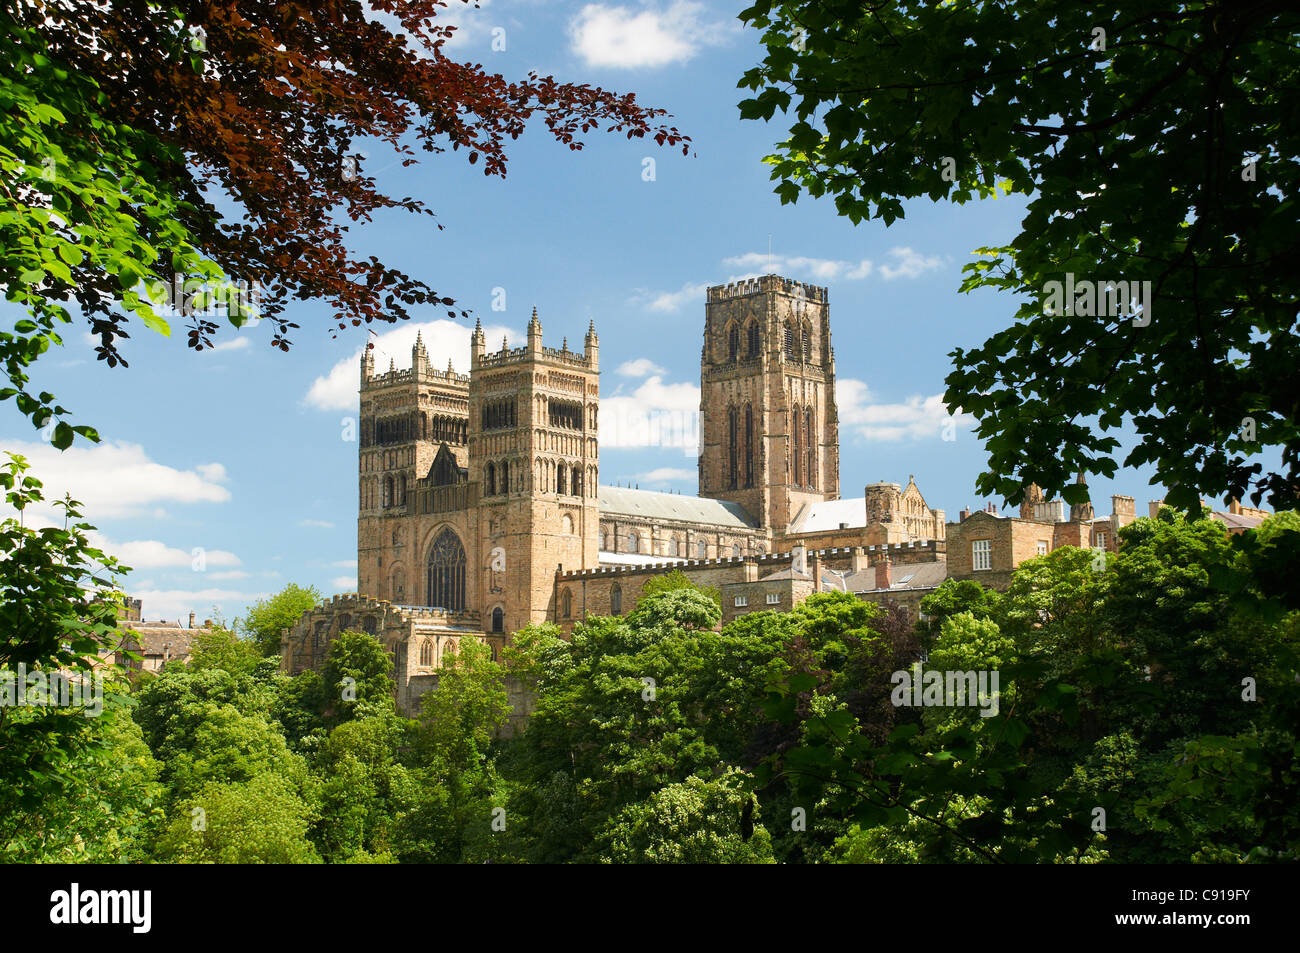 Durham Cathedral is on the hilltop overlooking the banks of the River Wear. The cathedral and castle were developed on a Stock Photo